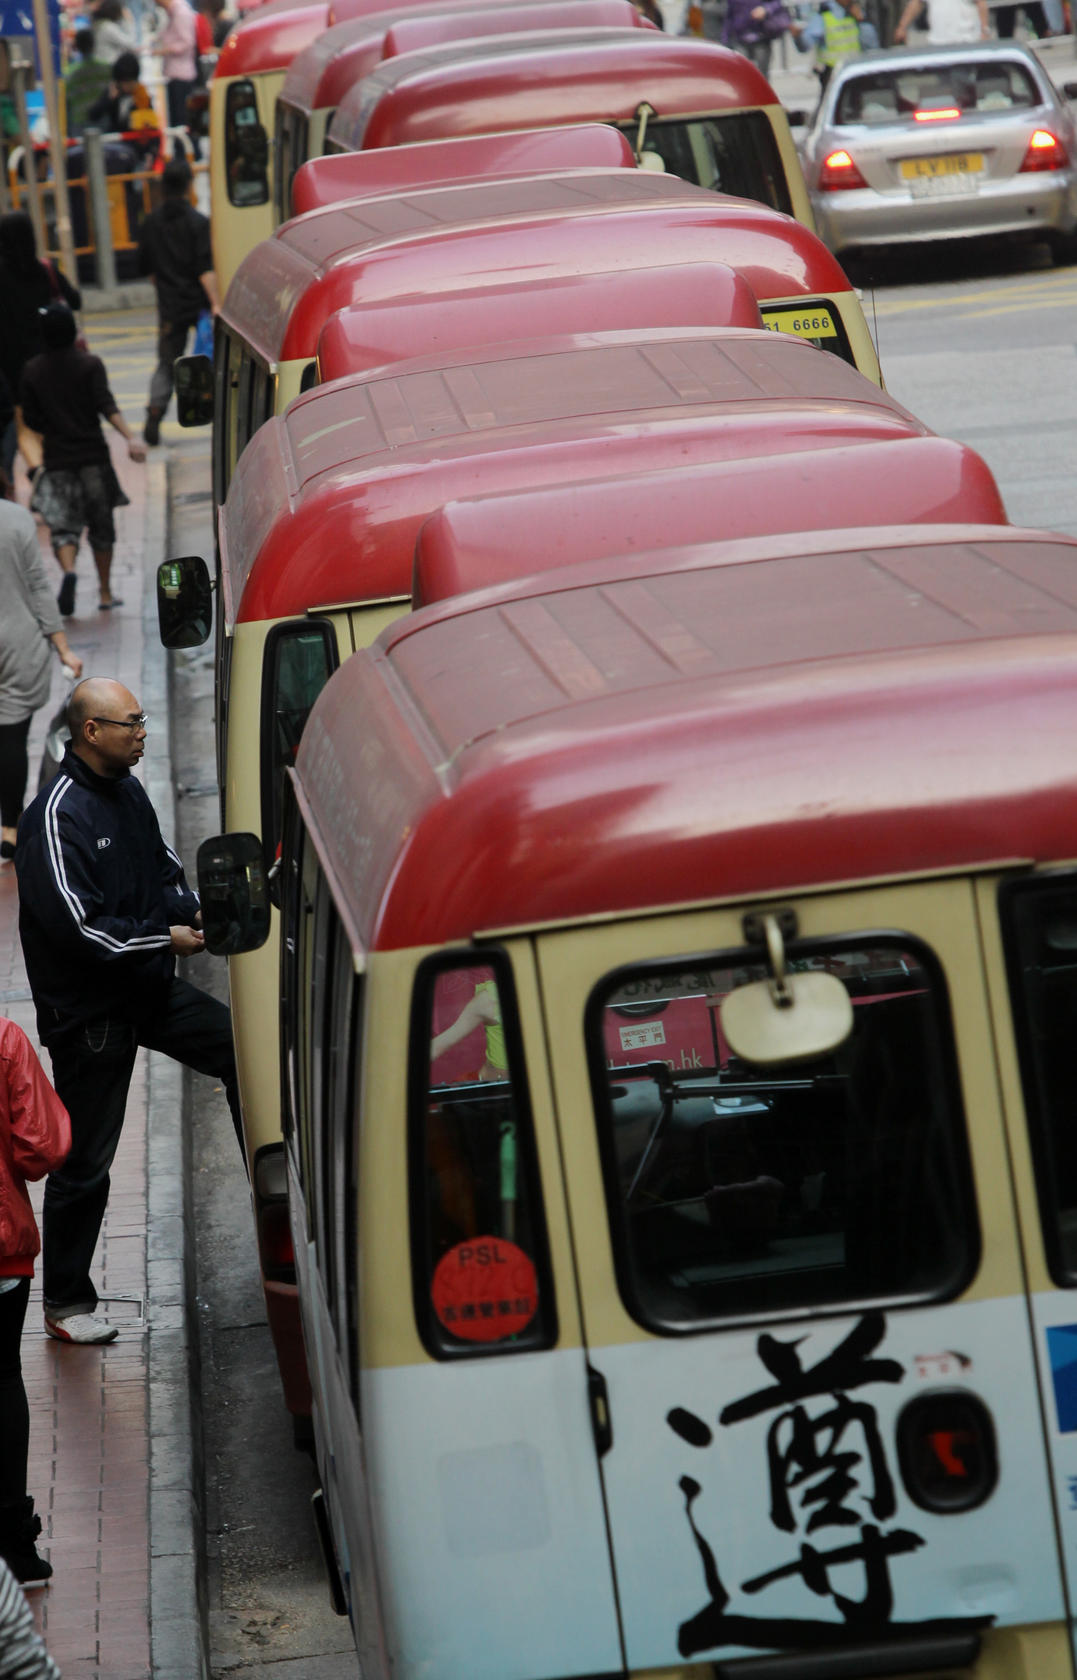 Commuters may not want to be "entertained" on minibuses. Photo: David Wong